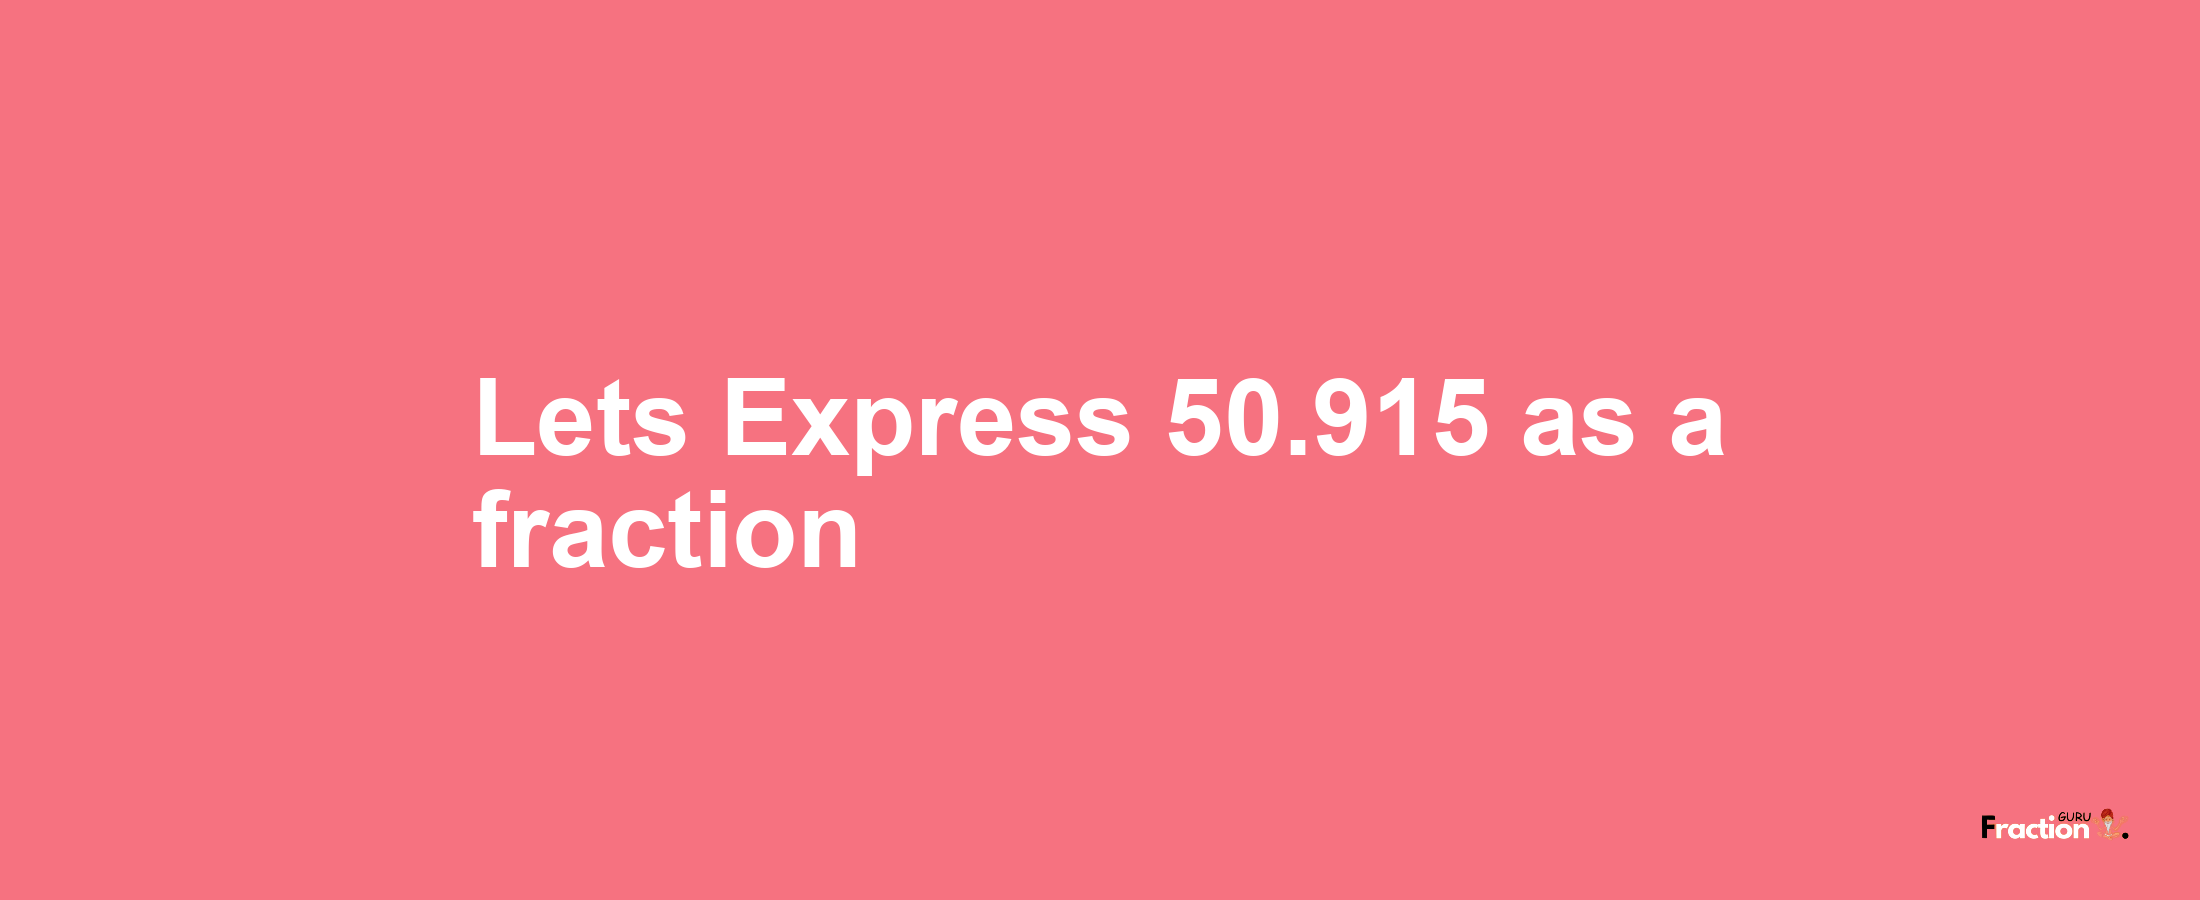 Lets Express 50.915 as afraction